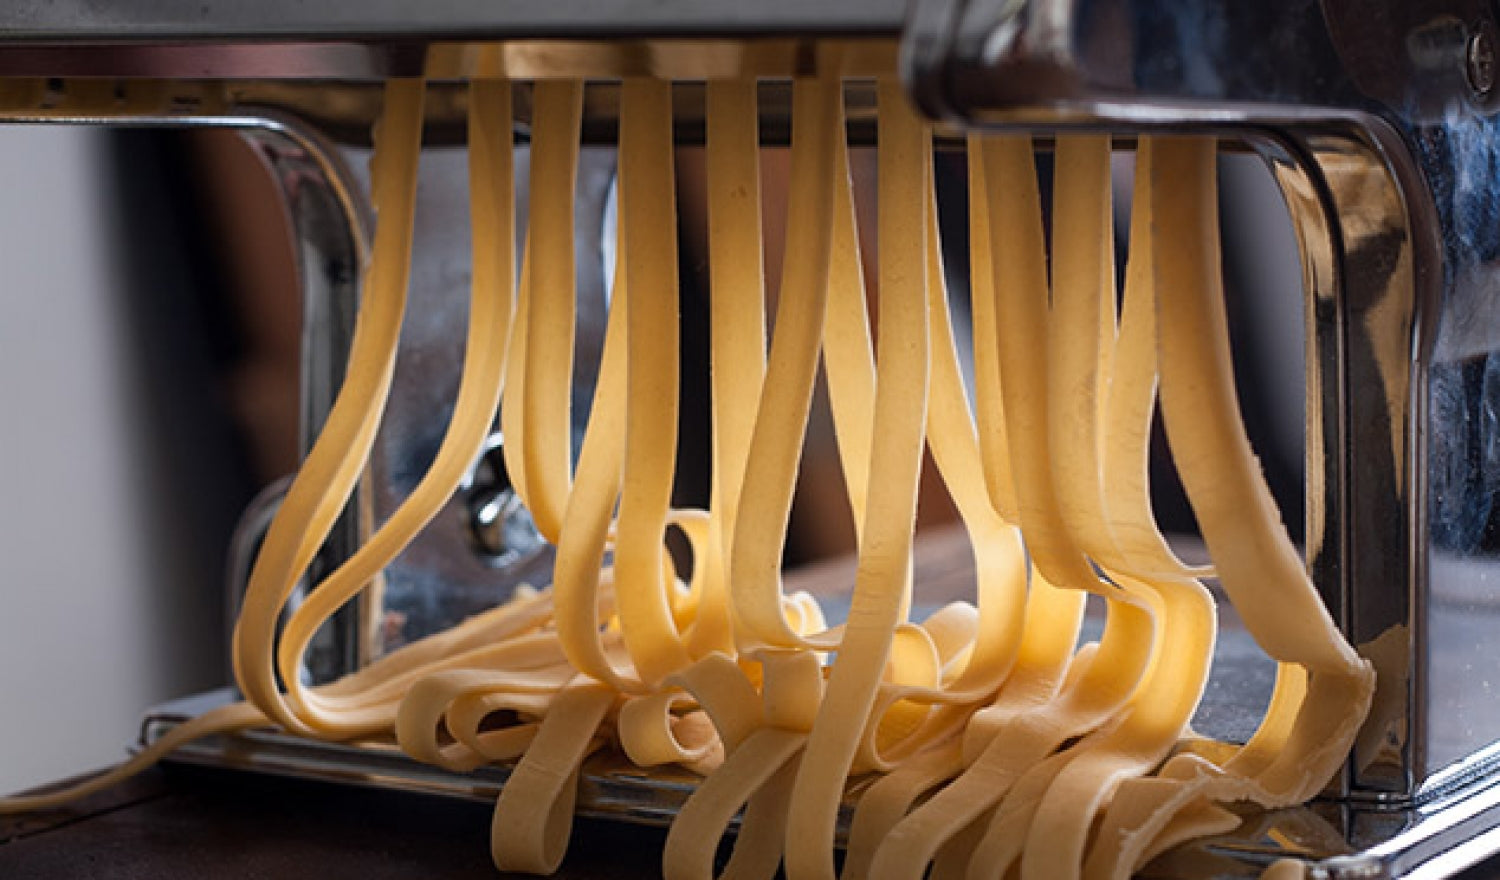 The 8 Best Pasta Tools for Fresh Pasta